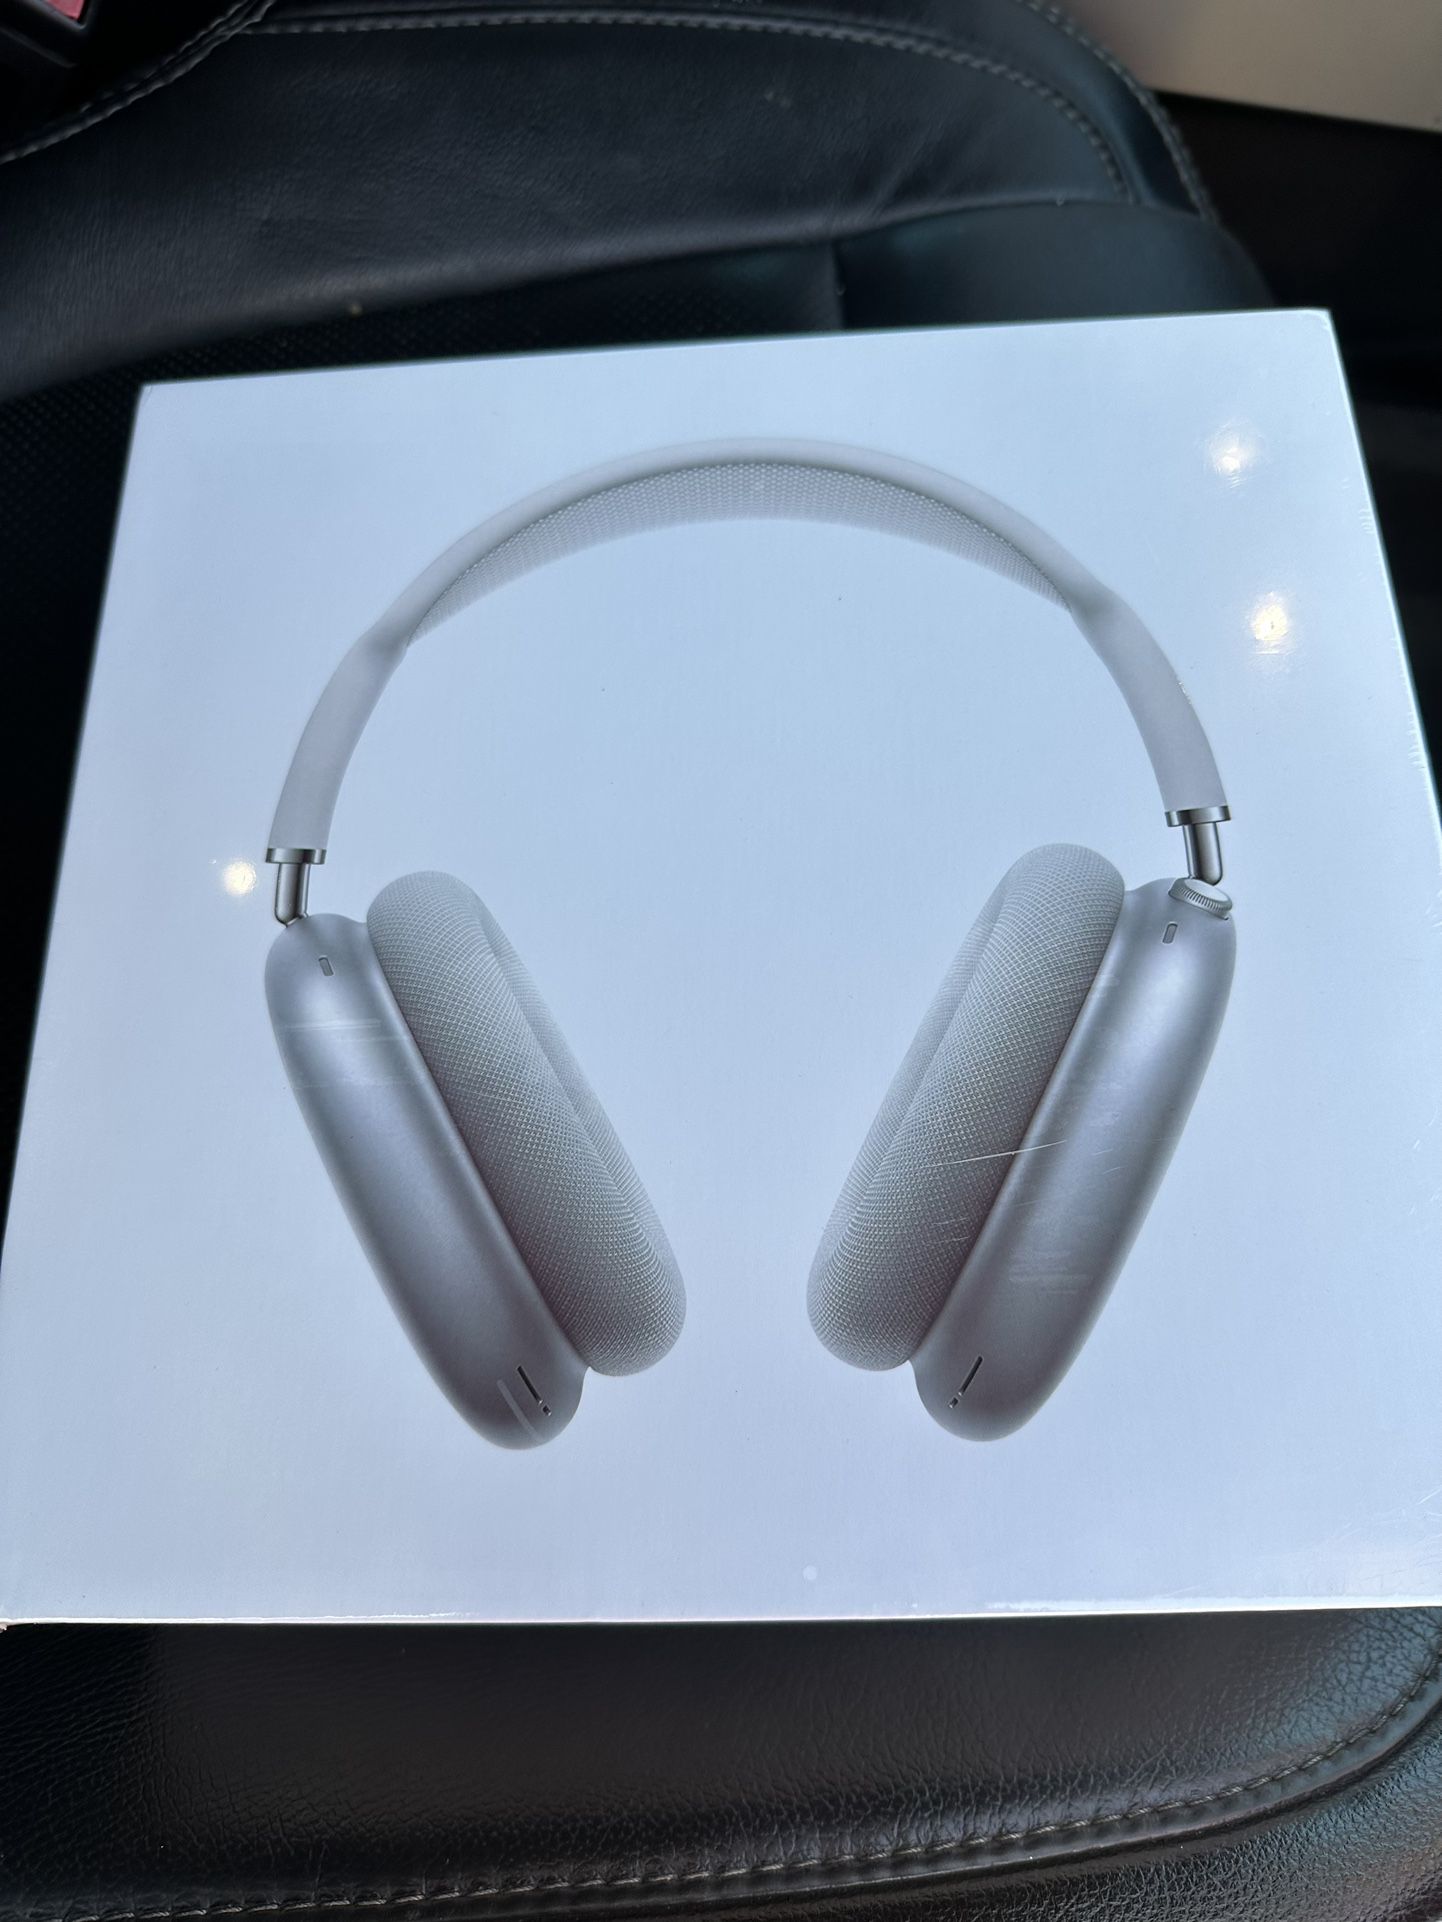 New Sealed AirPods Pro Max Silver 